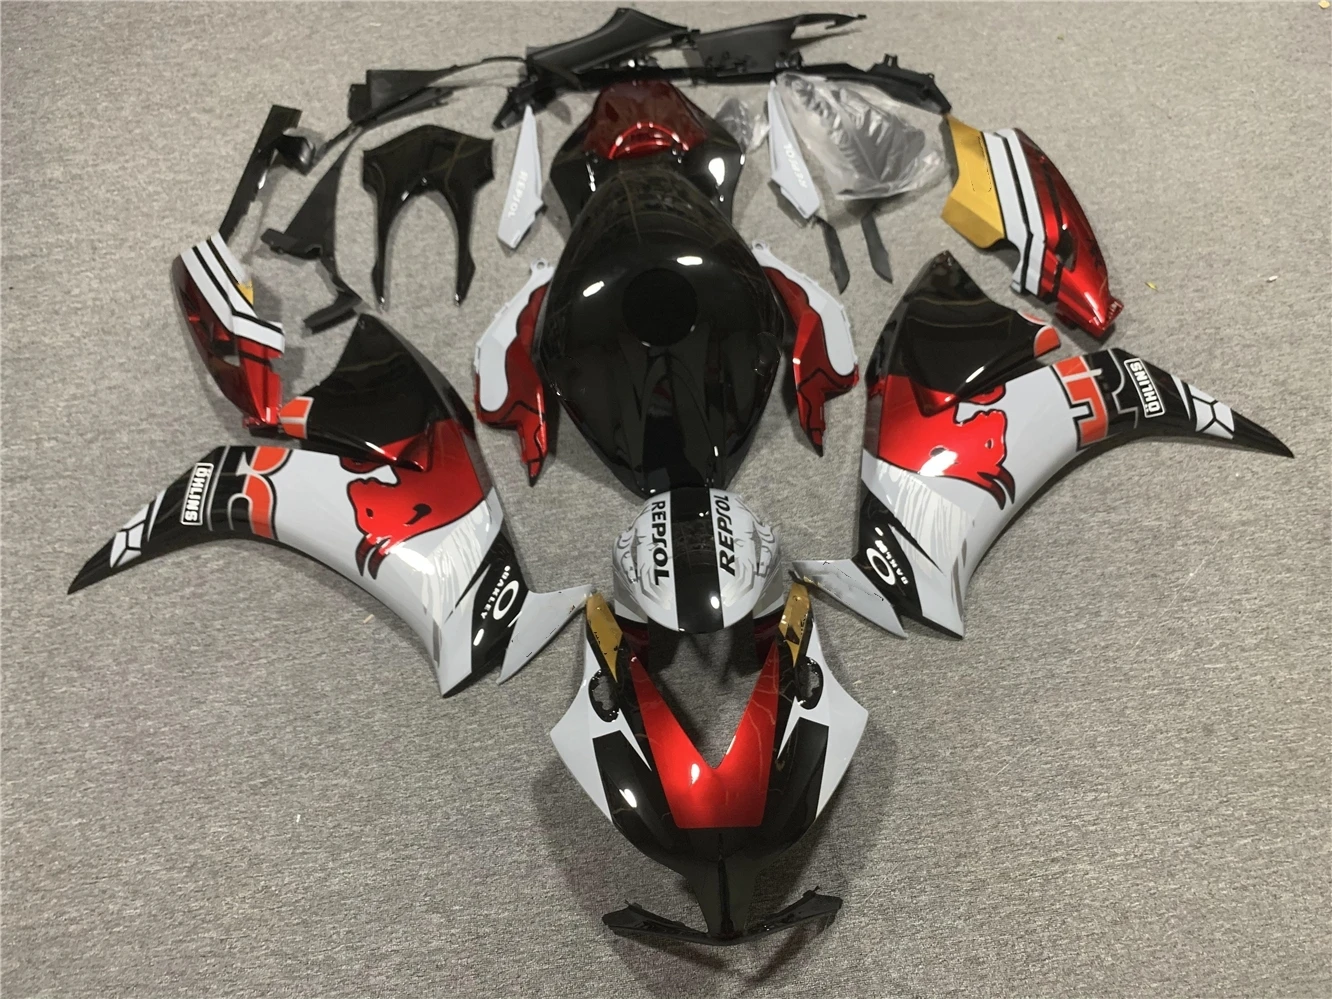 Motorcycle Fairing Kit Suitable for CBR1000RR 12-16 years CBR1000 2012 2013 2014 2015 2016 Fairing wine red Cement grey Black